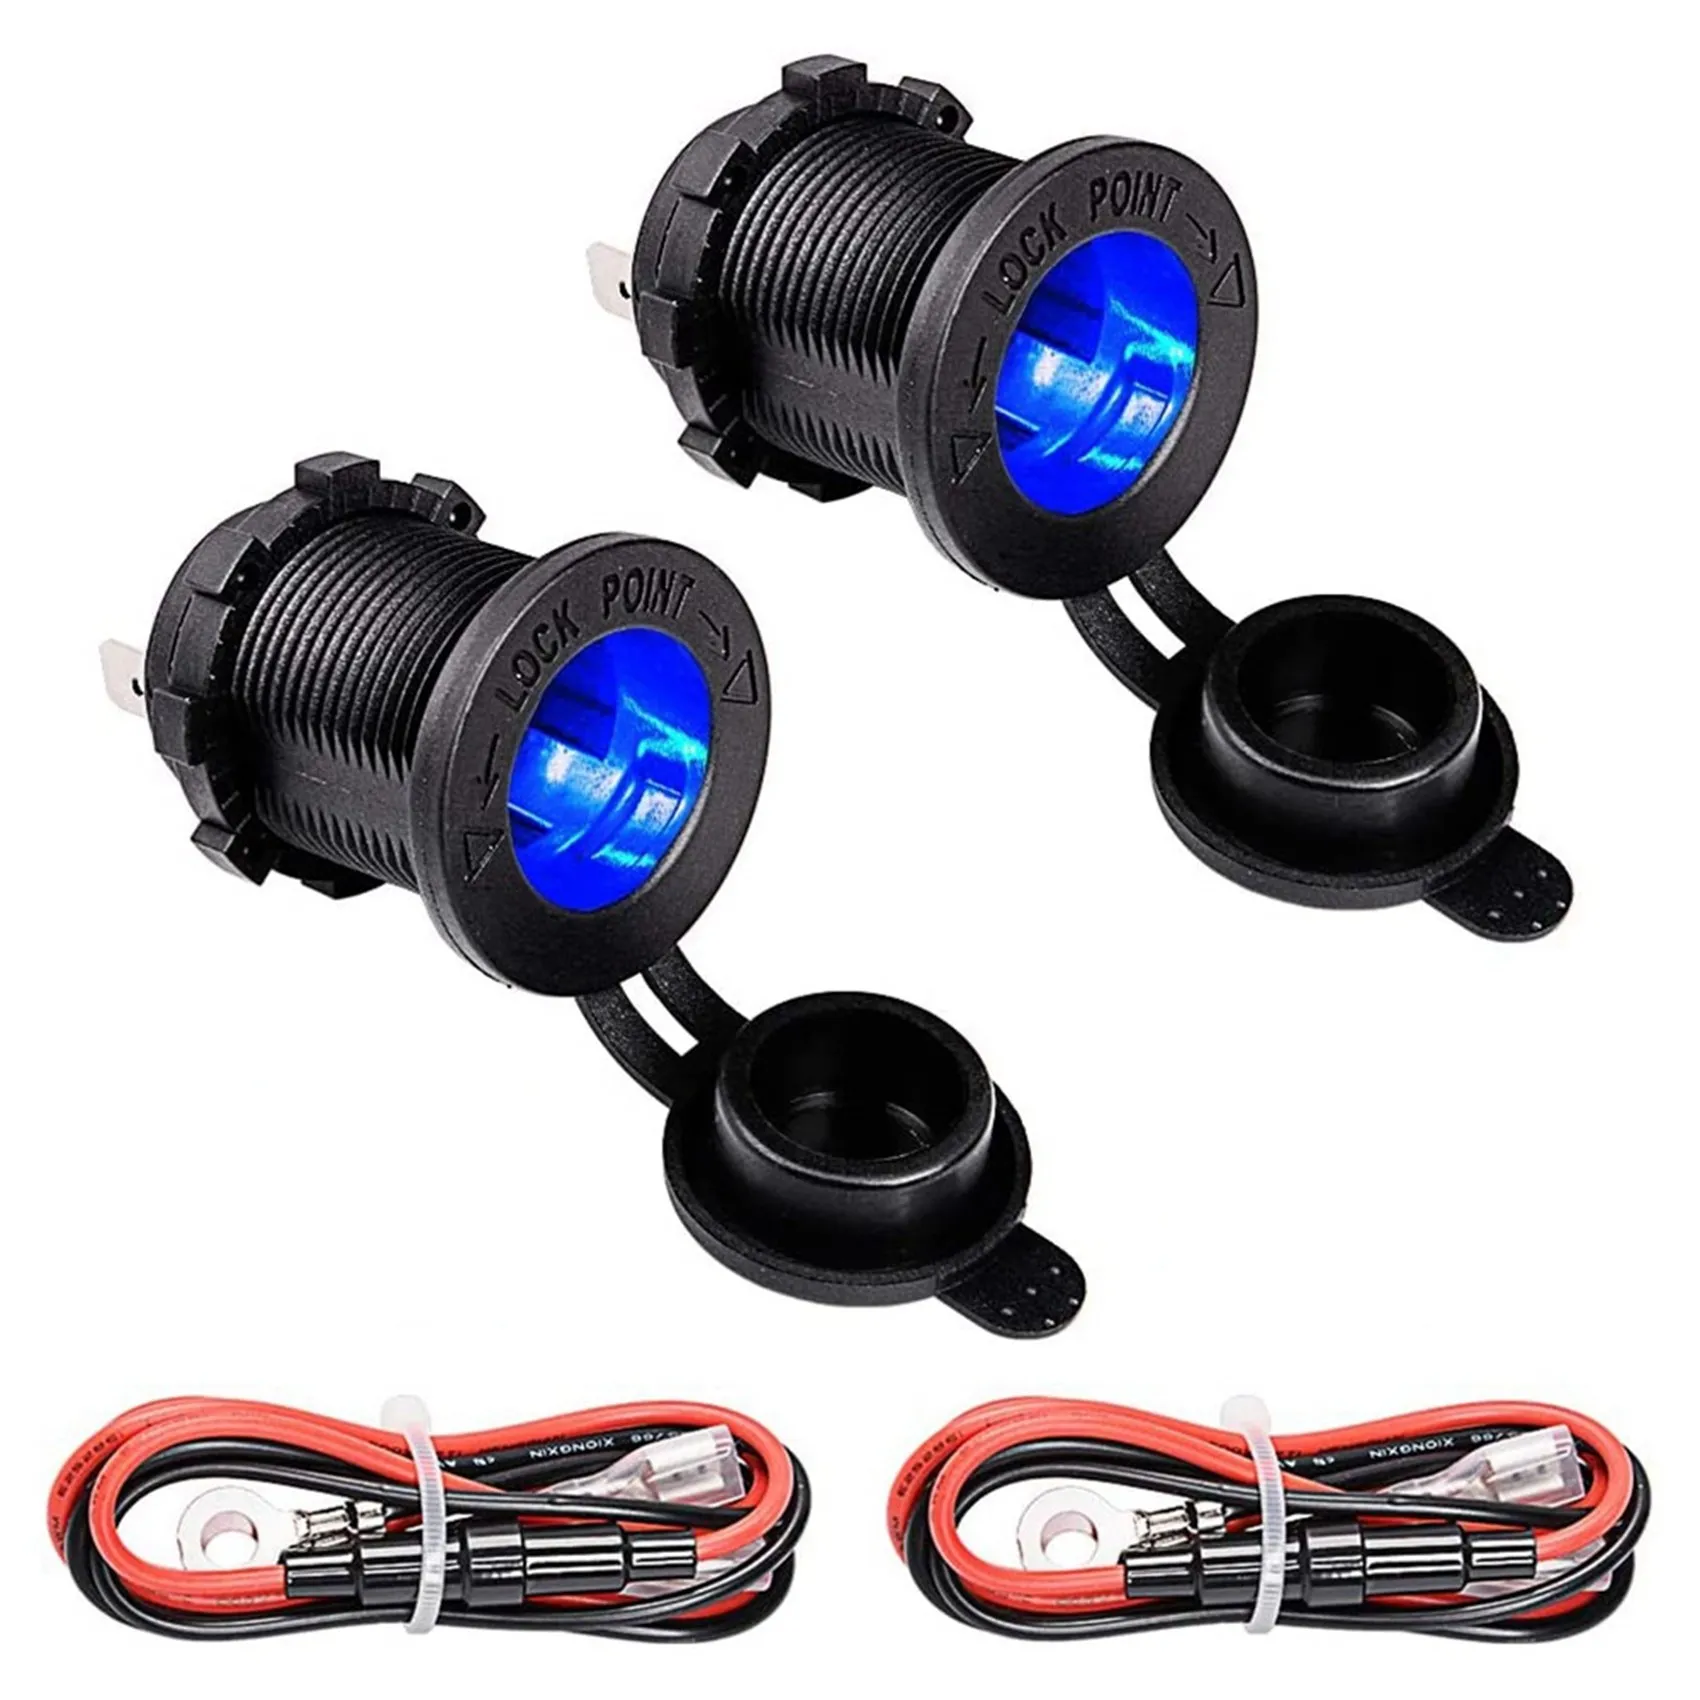 

2 Pack Charger Lighter with Blue LED Indicator, Car Lighter Charger Socket 0.6 M Connection Cable Car Marine